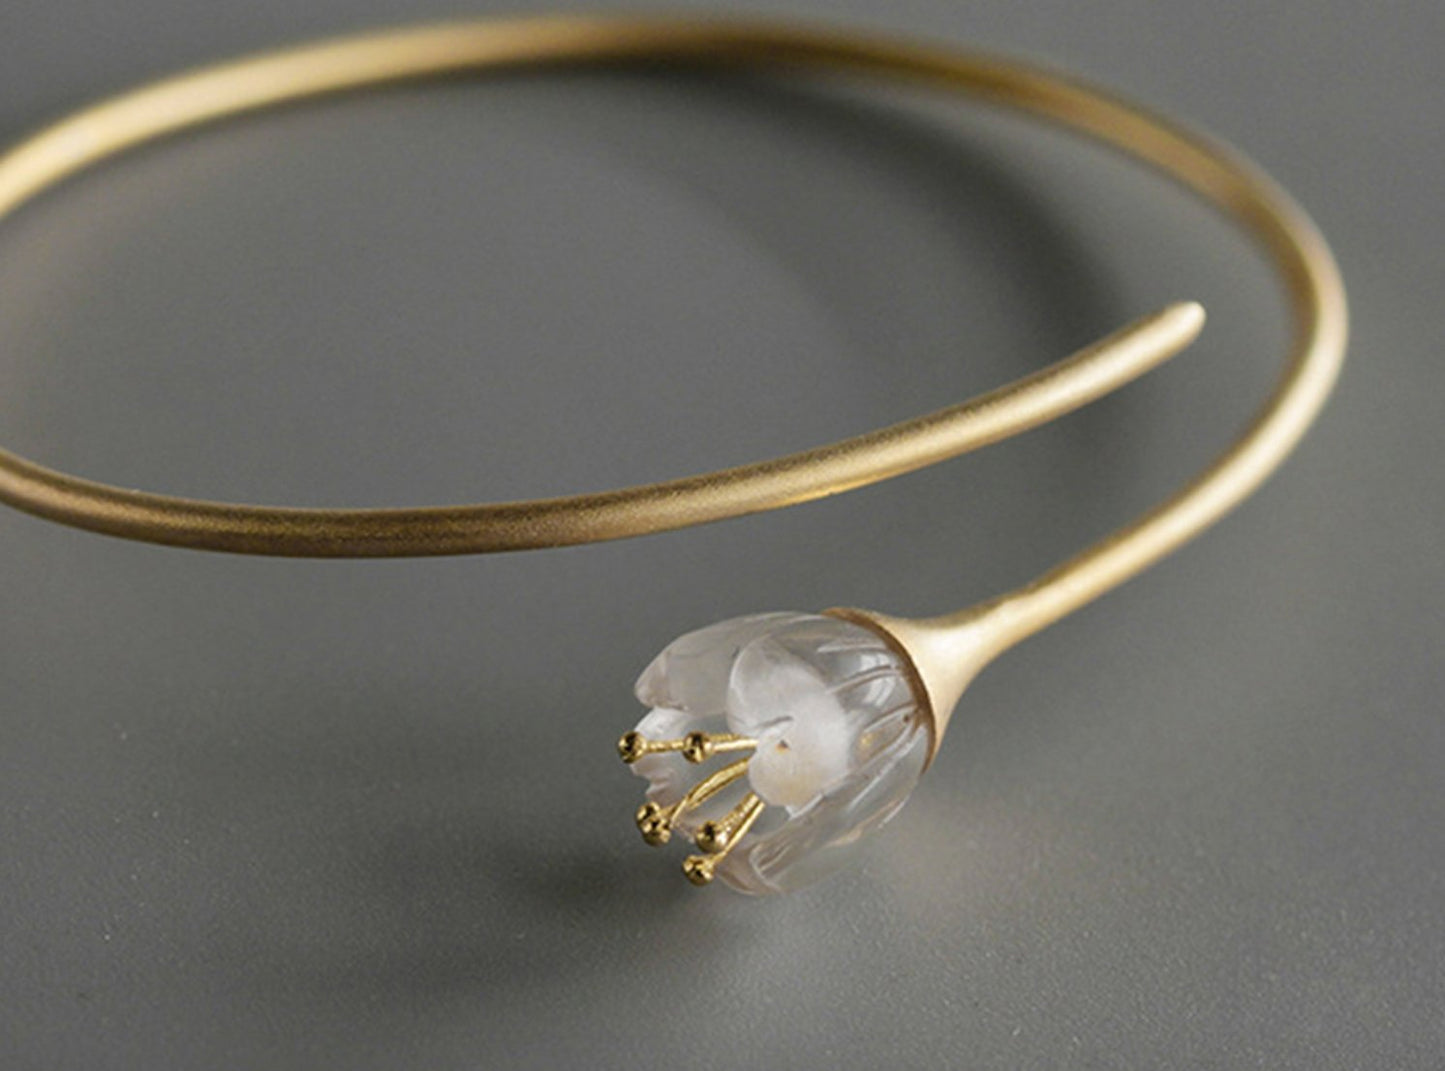 Gold-dipped 925 Sterling Silver Orchid Cuff Bracelet Adjustable Bangle Flower - Egret Jewellery